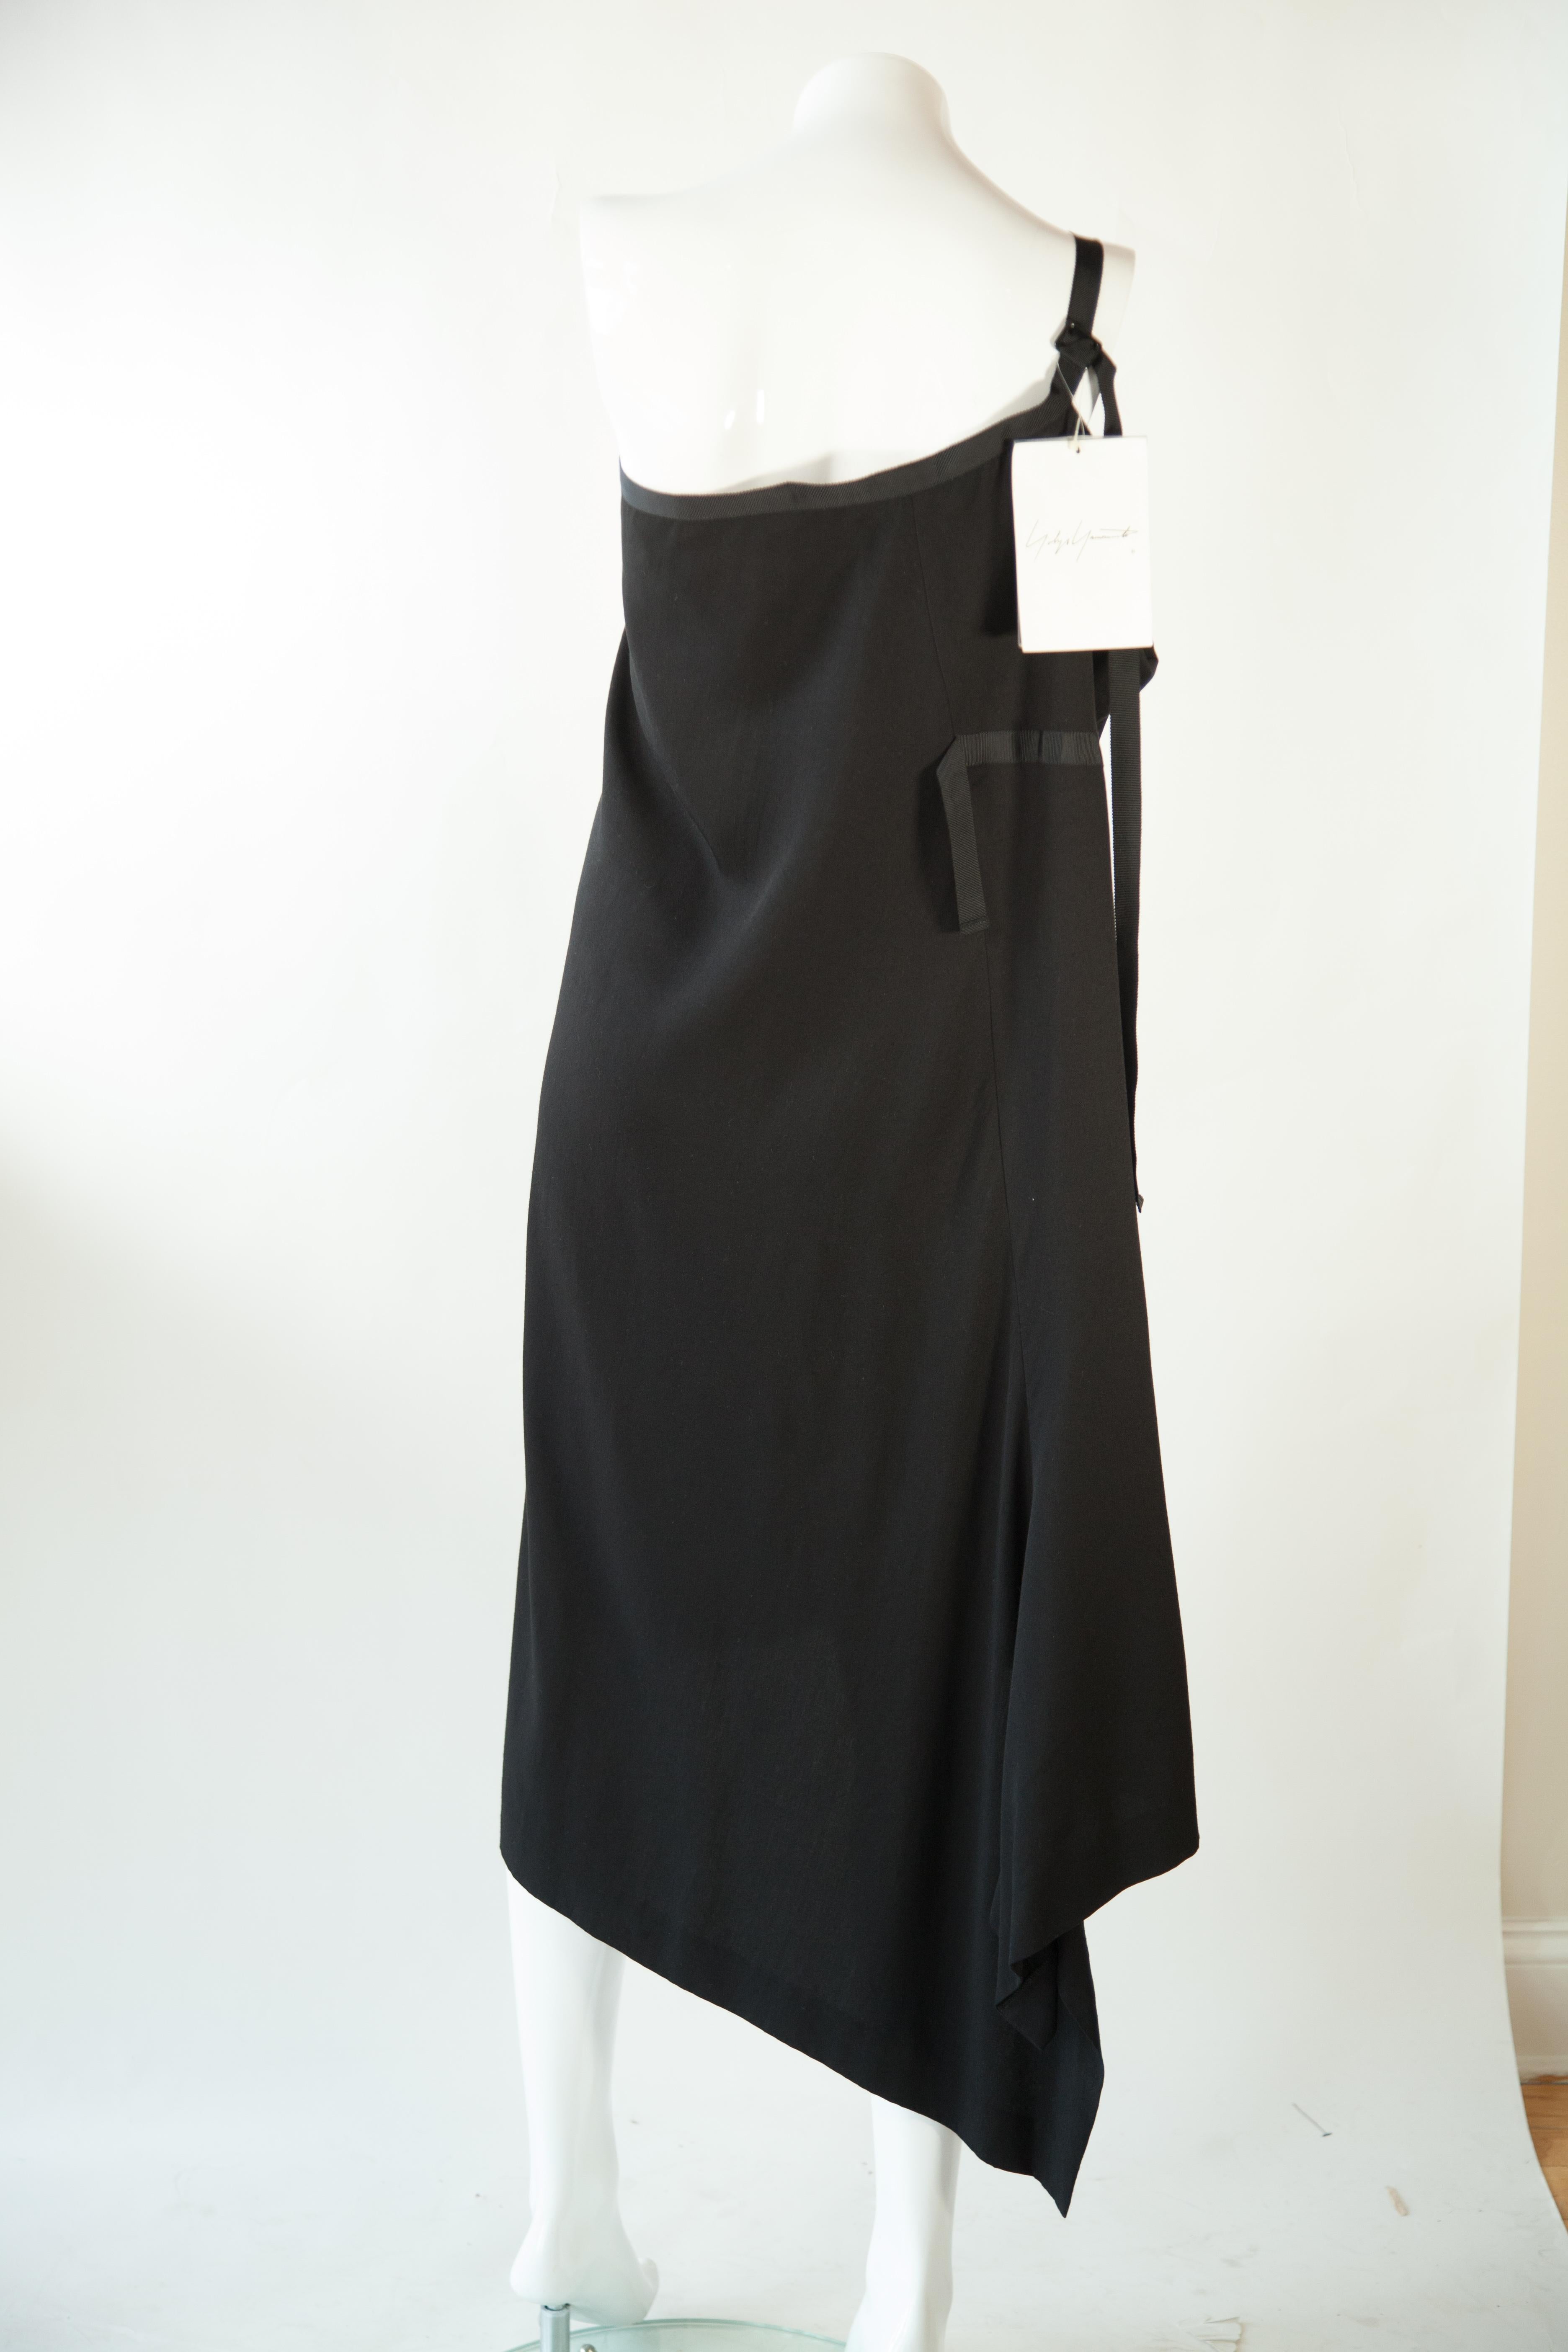 This Yohji Yamamoto black one shoulder dress and skirt combination features an asymmetrical slit for a unique, eye-catching look. The design is timeless, yet fashion-forward, allowing you to stand out from the crowd and make a bold statement.